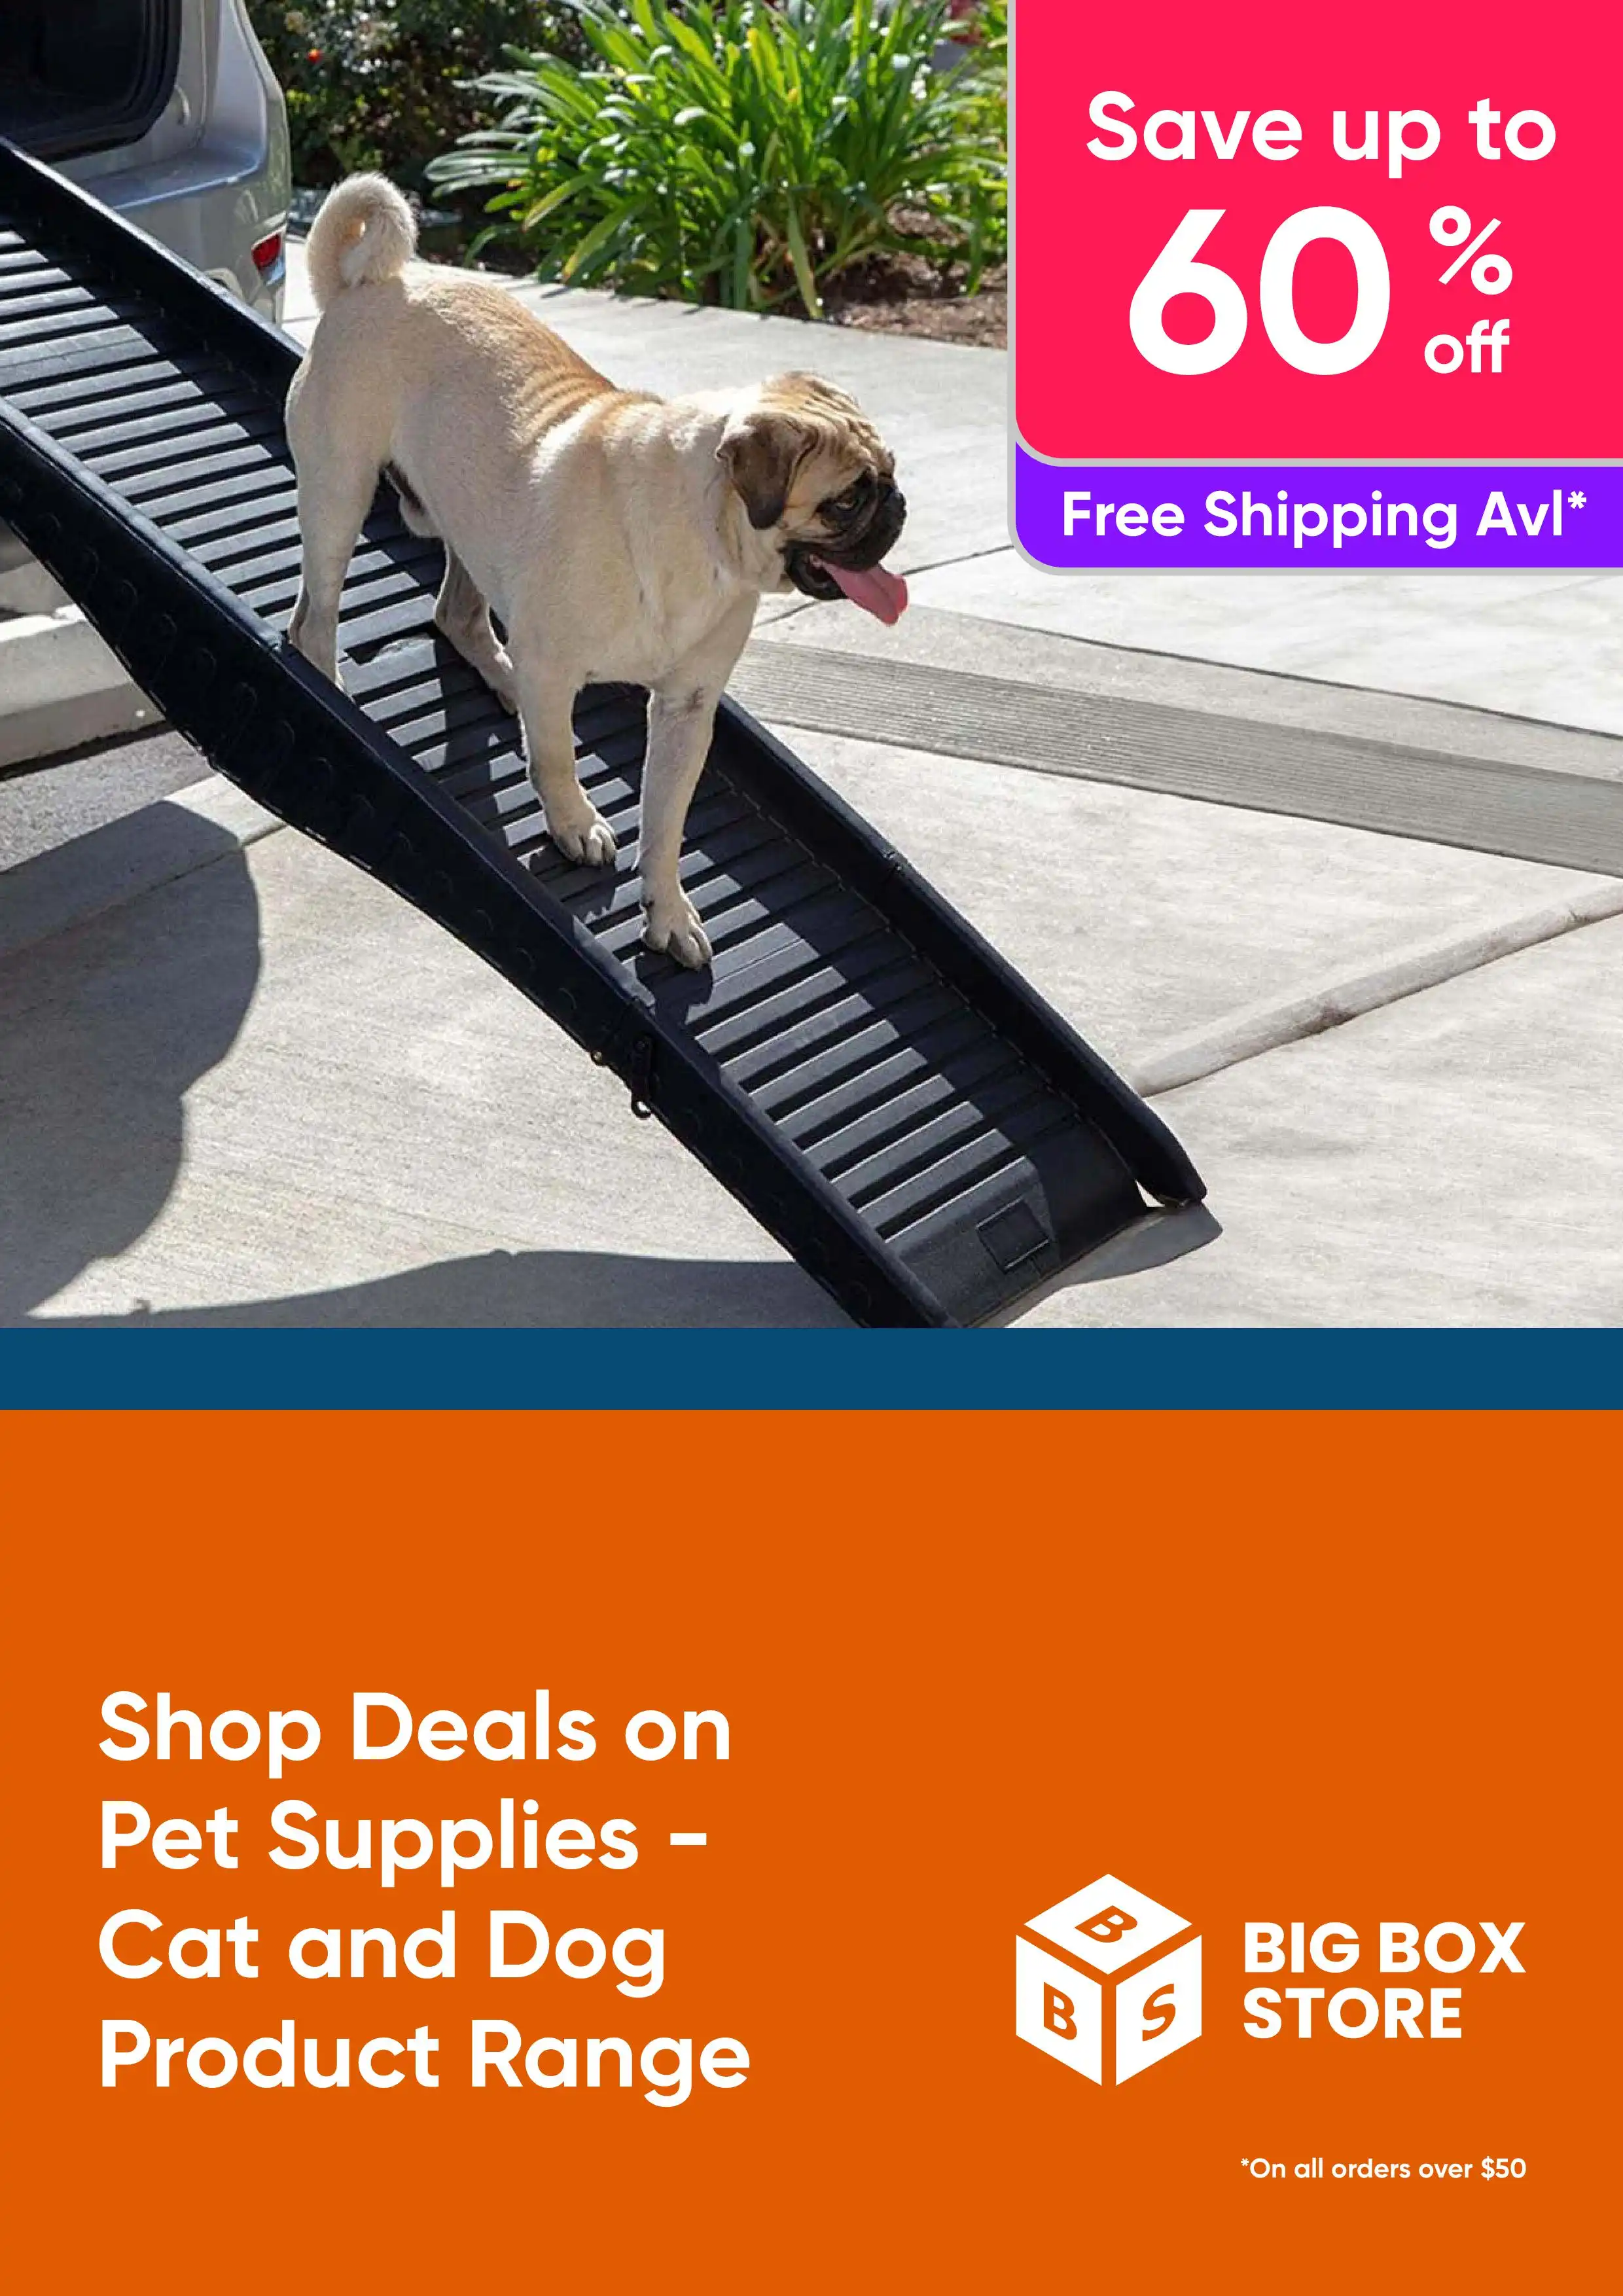 Shop Deals on Pet Supplies - Save Up To 60% Cat and Dog Product Range